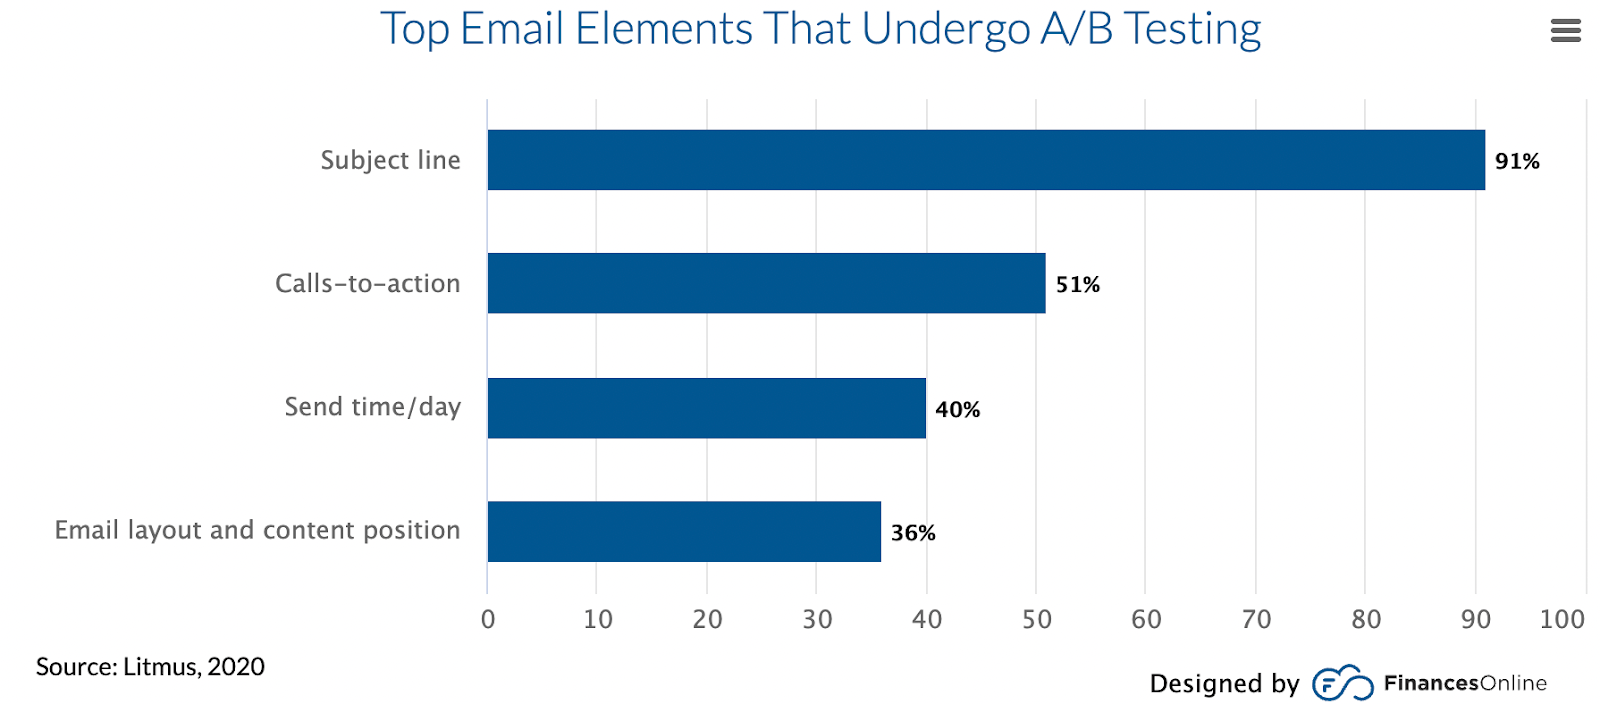 Top email elements that undergo A/B testing